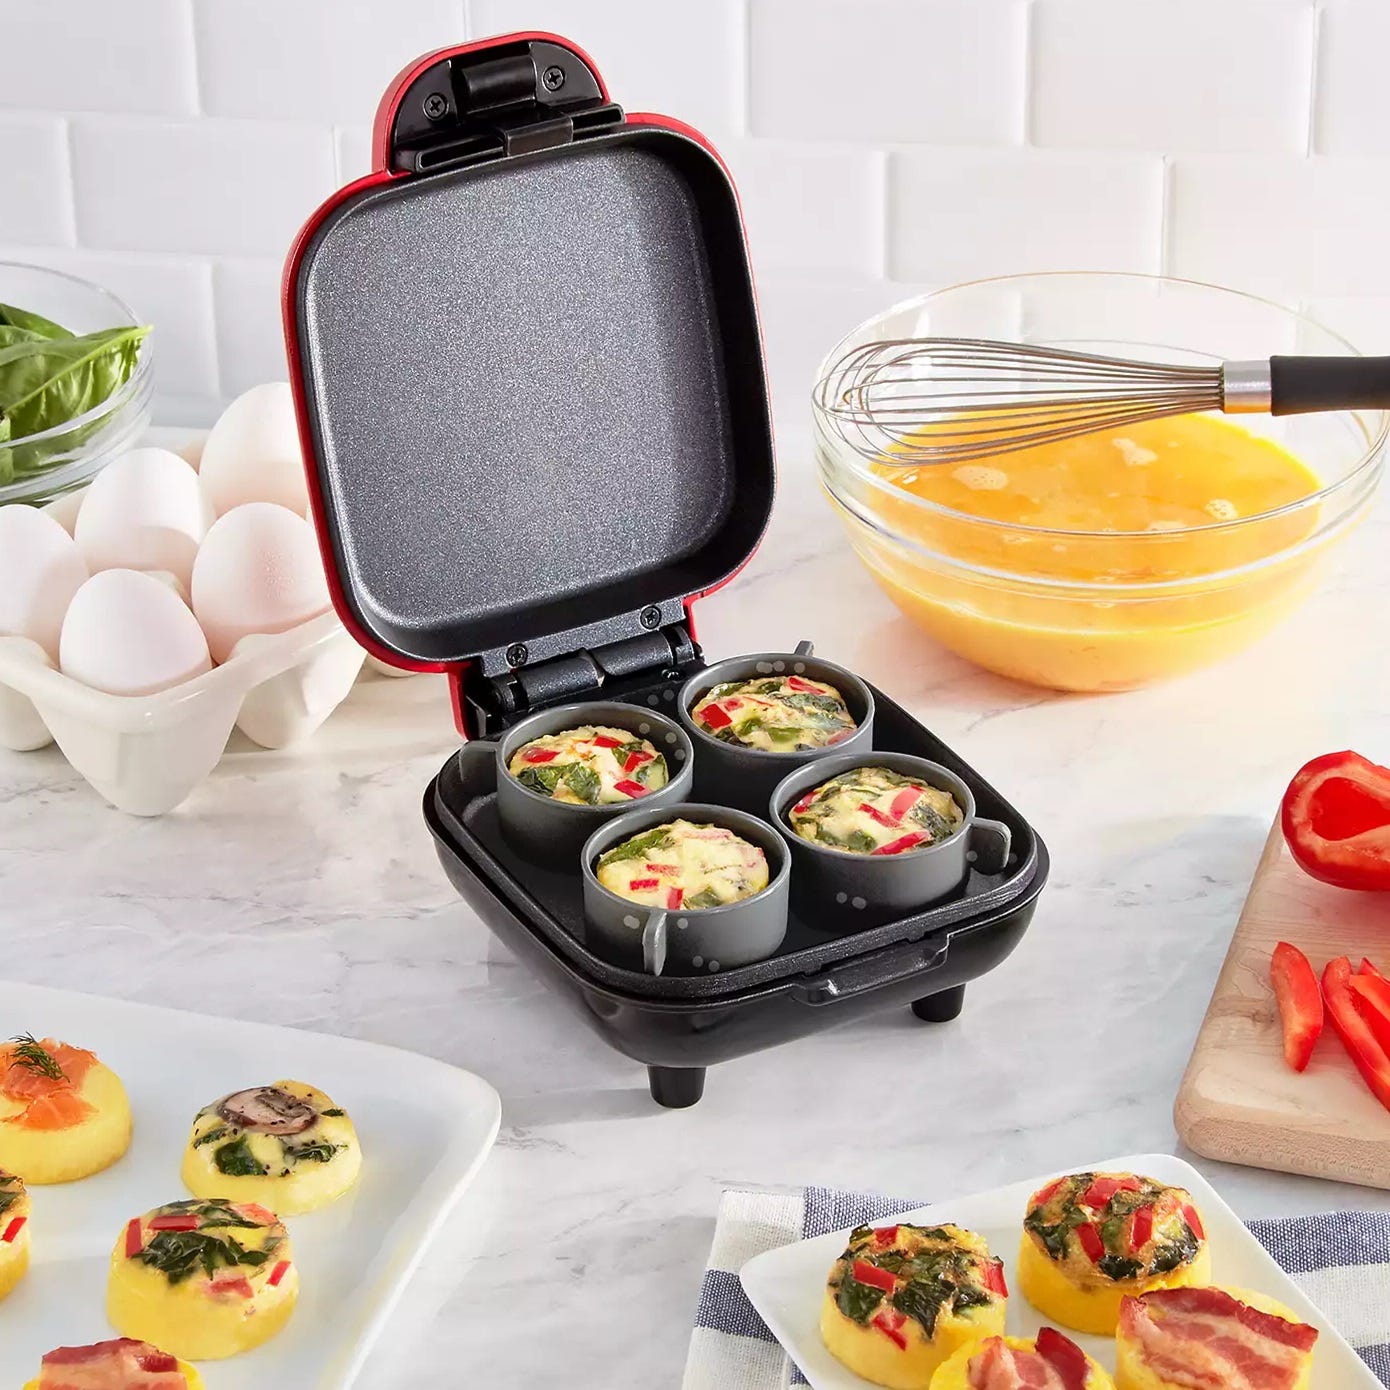 An open egg bite maker with six compartments containing uncooked egg mixture, next to ingredients like eggs, vegetables, and a bowl of whisked eggs.